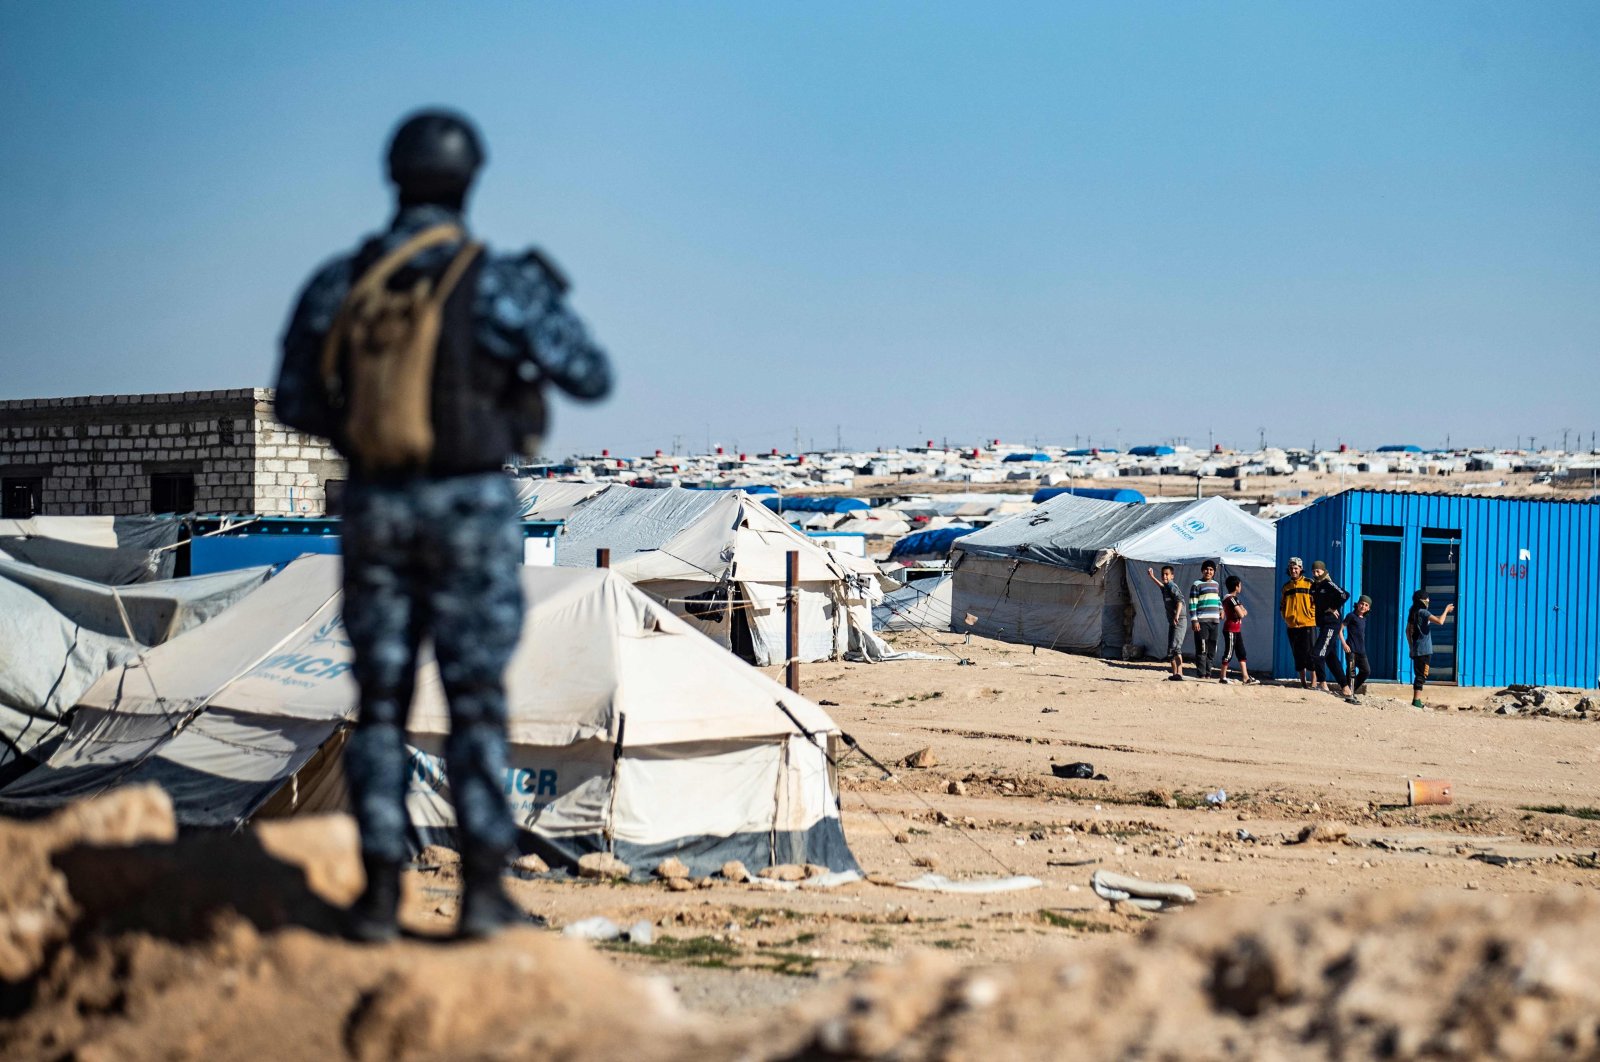 Special forces of the Syrian Democratic Forces keep watch in the vicinity of the al-Hol camp, the larger of two Kurdish-run displacement camps for relatives of Daesh members in Syria's northeast, March 30, 2021. (Photo by Delil Souleiman via AFP)